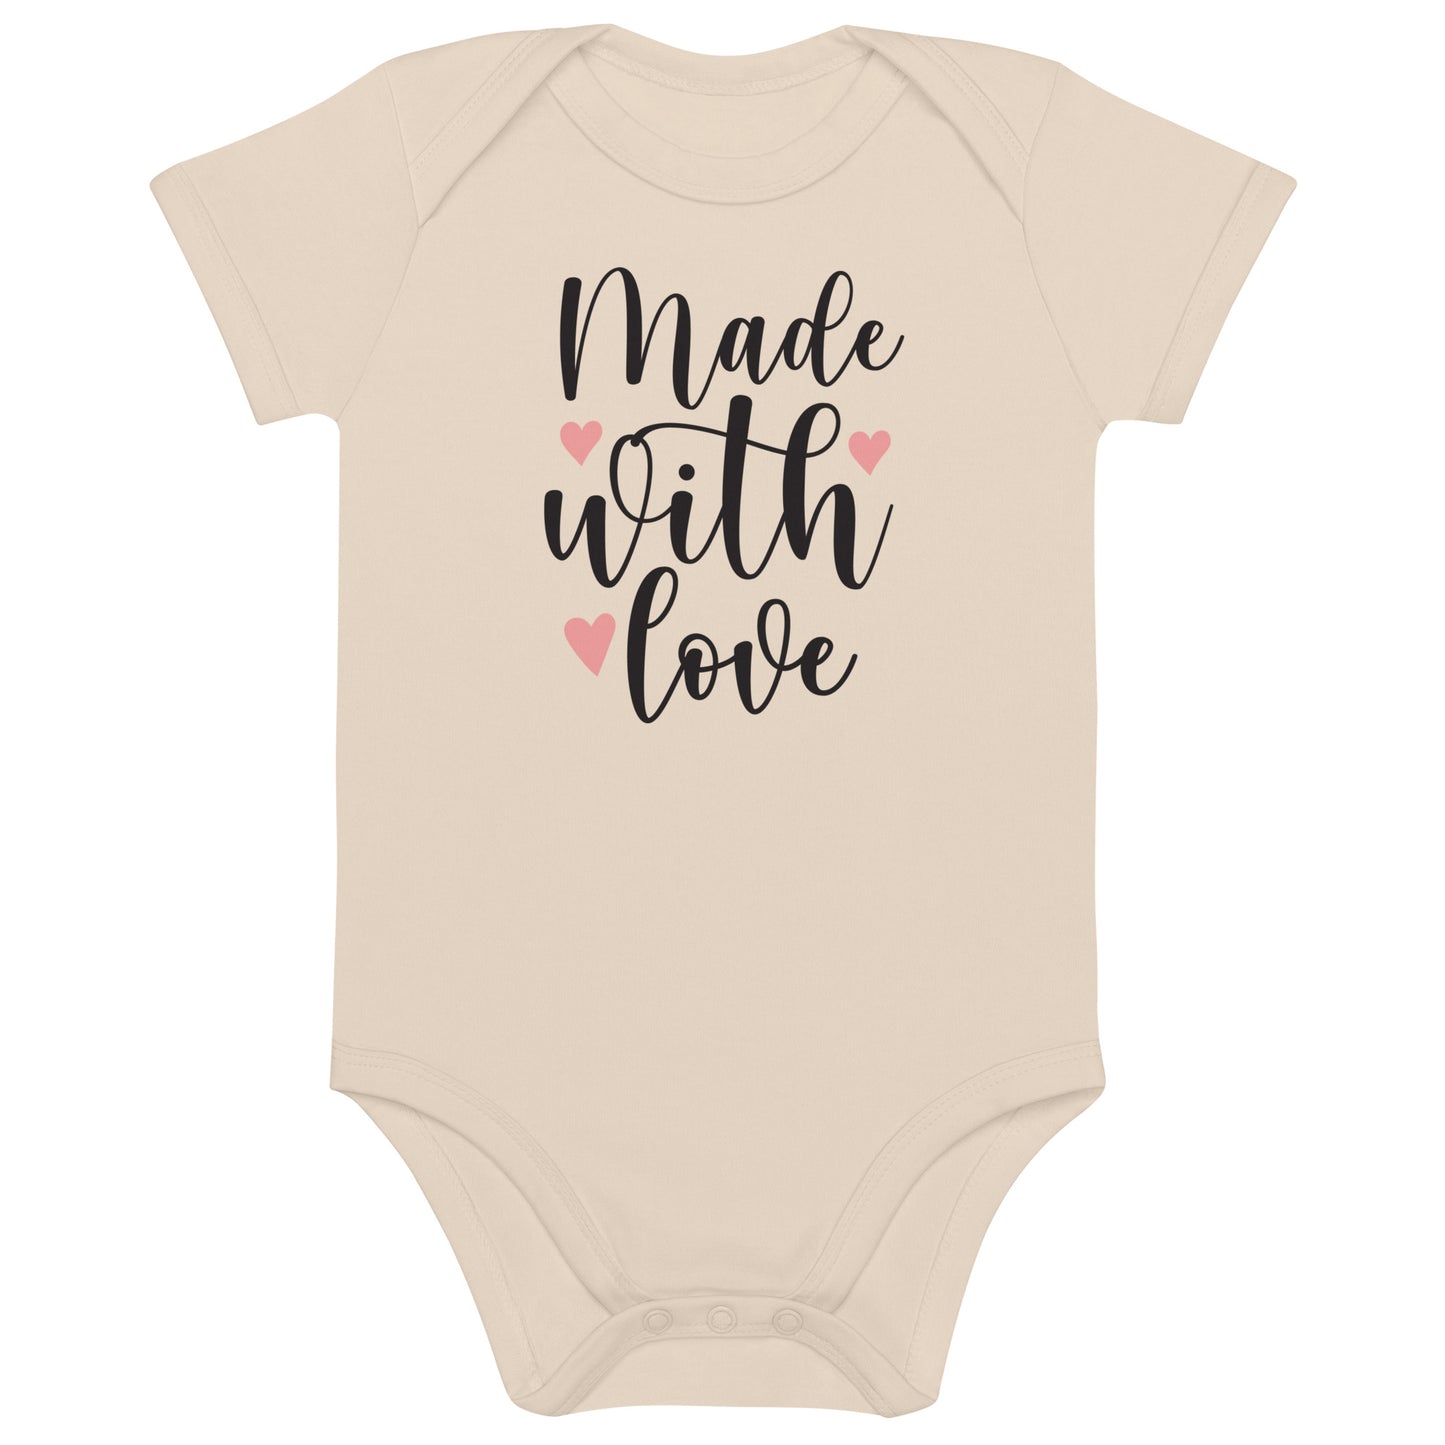 Organic cotton baby bodysuit - Made With Love